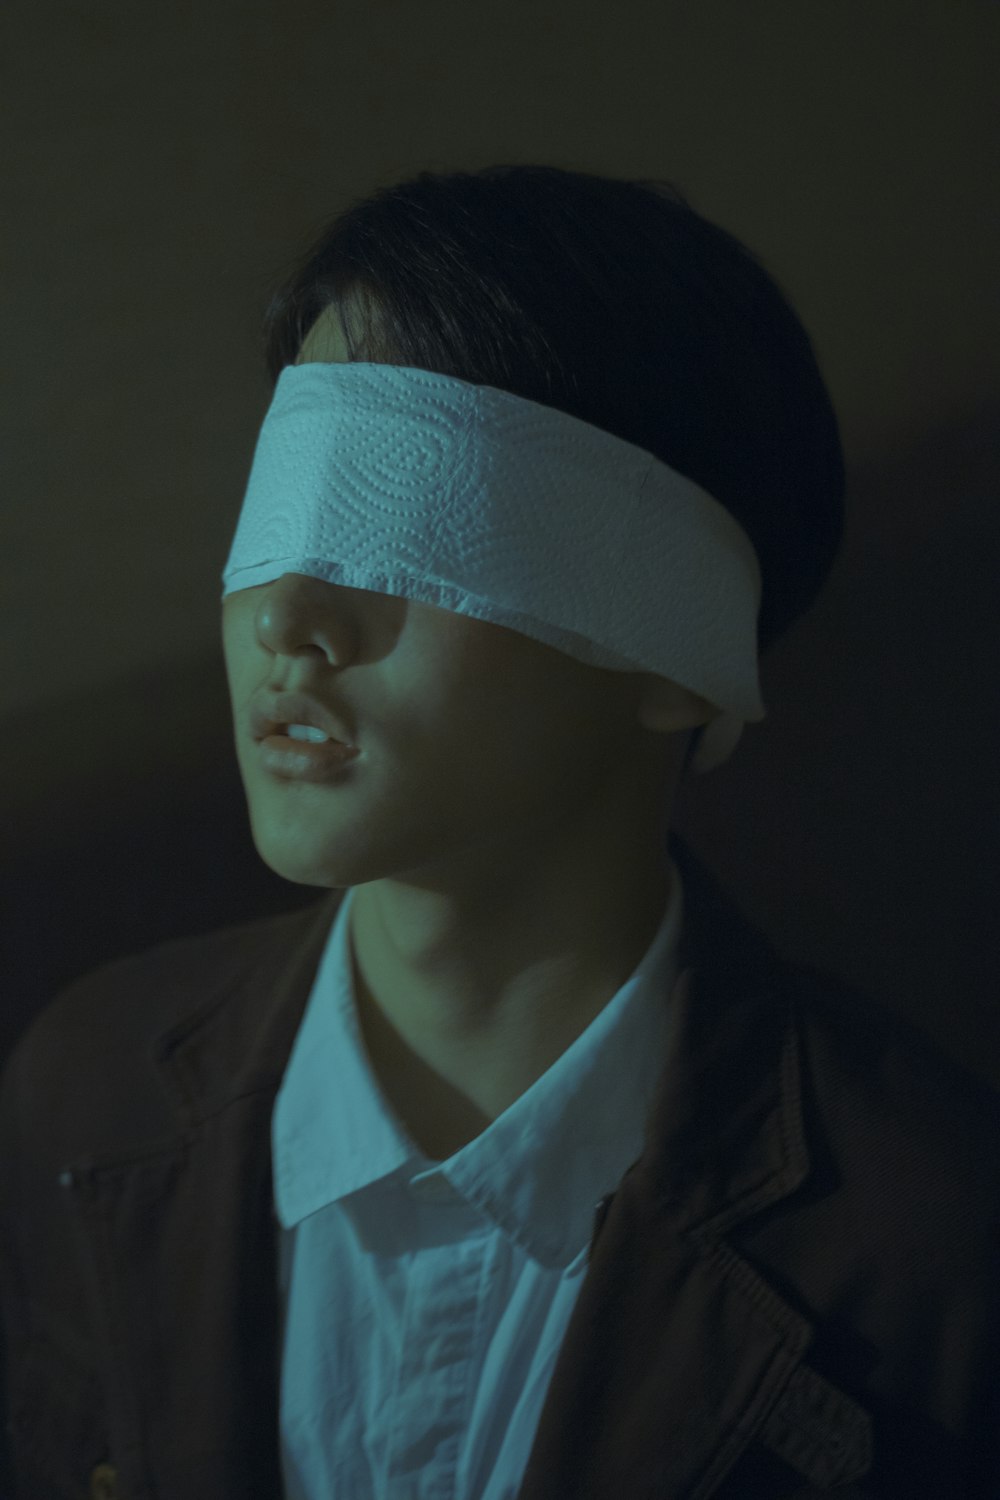 Blindfold Pictures Download Free Images On Unsplash Images, Photos, Reviews